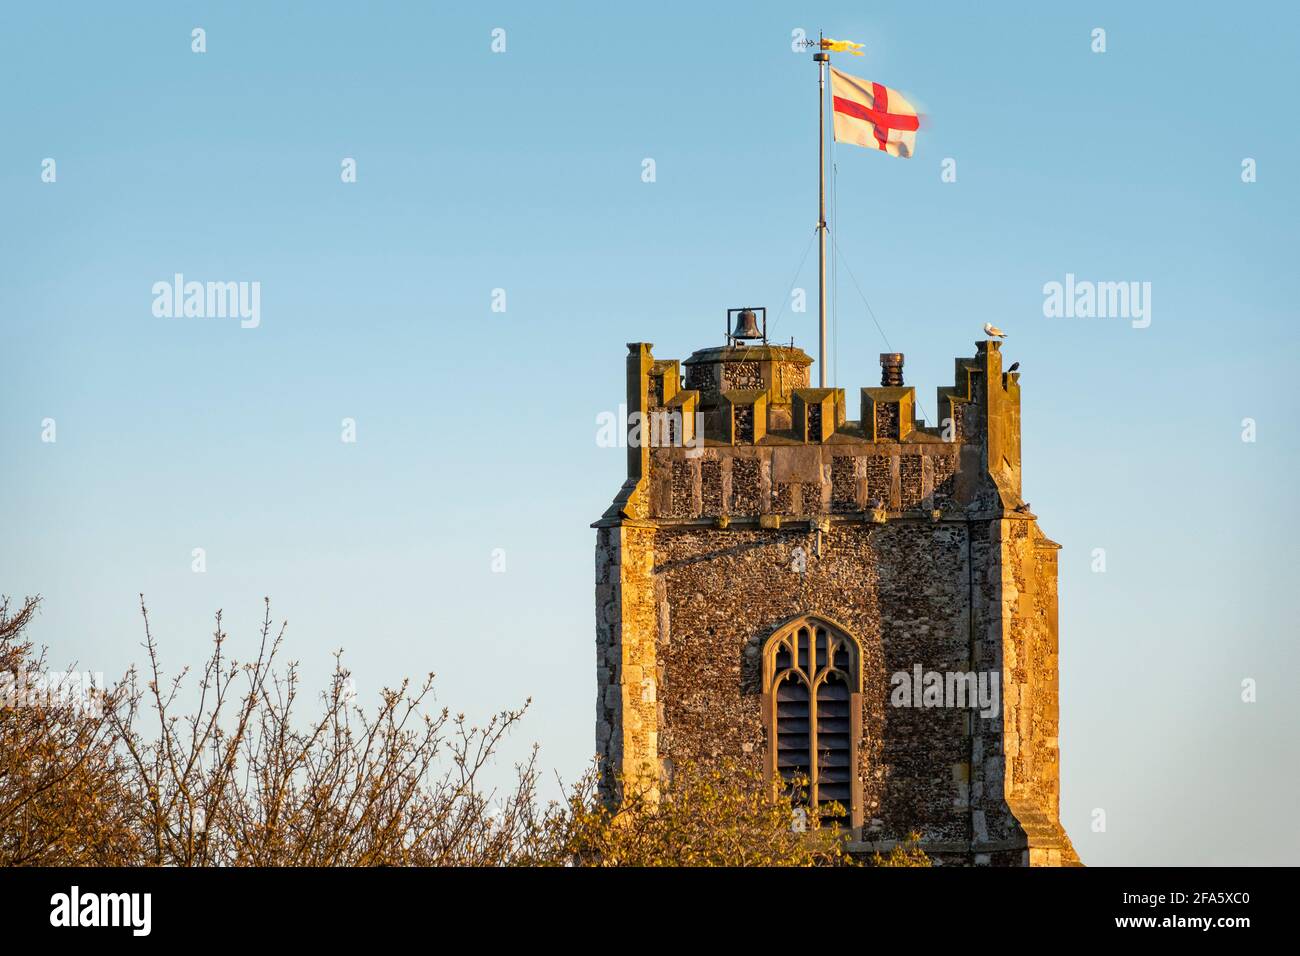 St George's flag flying at St Peter and St Paul's Church, Aldeburgh, UK, in celebration of Queen Elizabeth's birthday Stock Photo